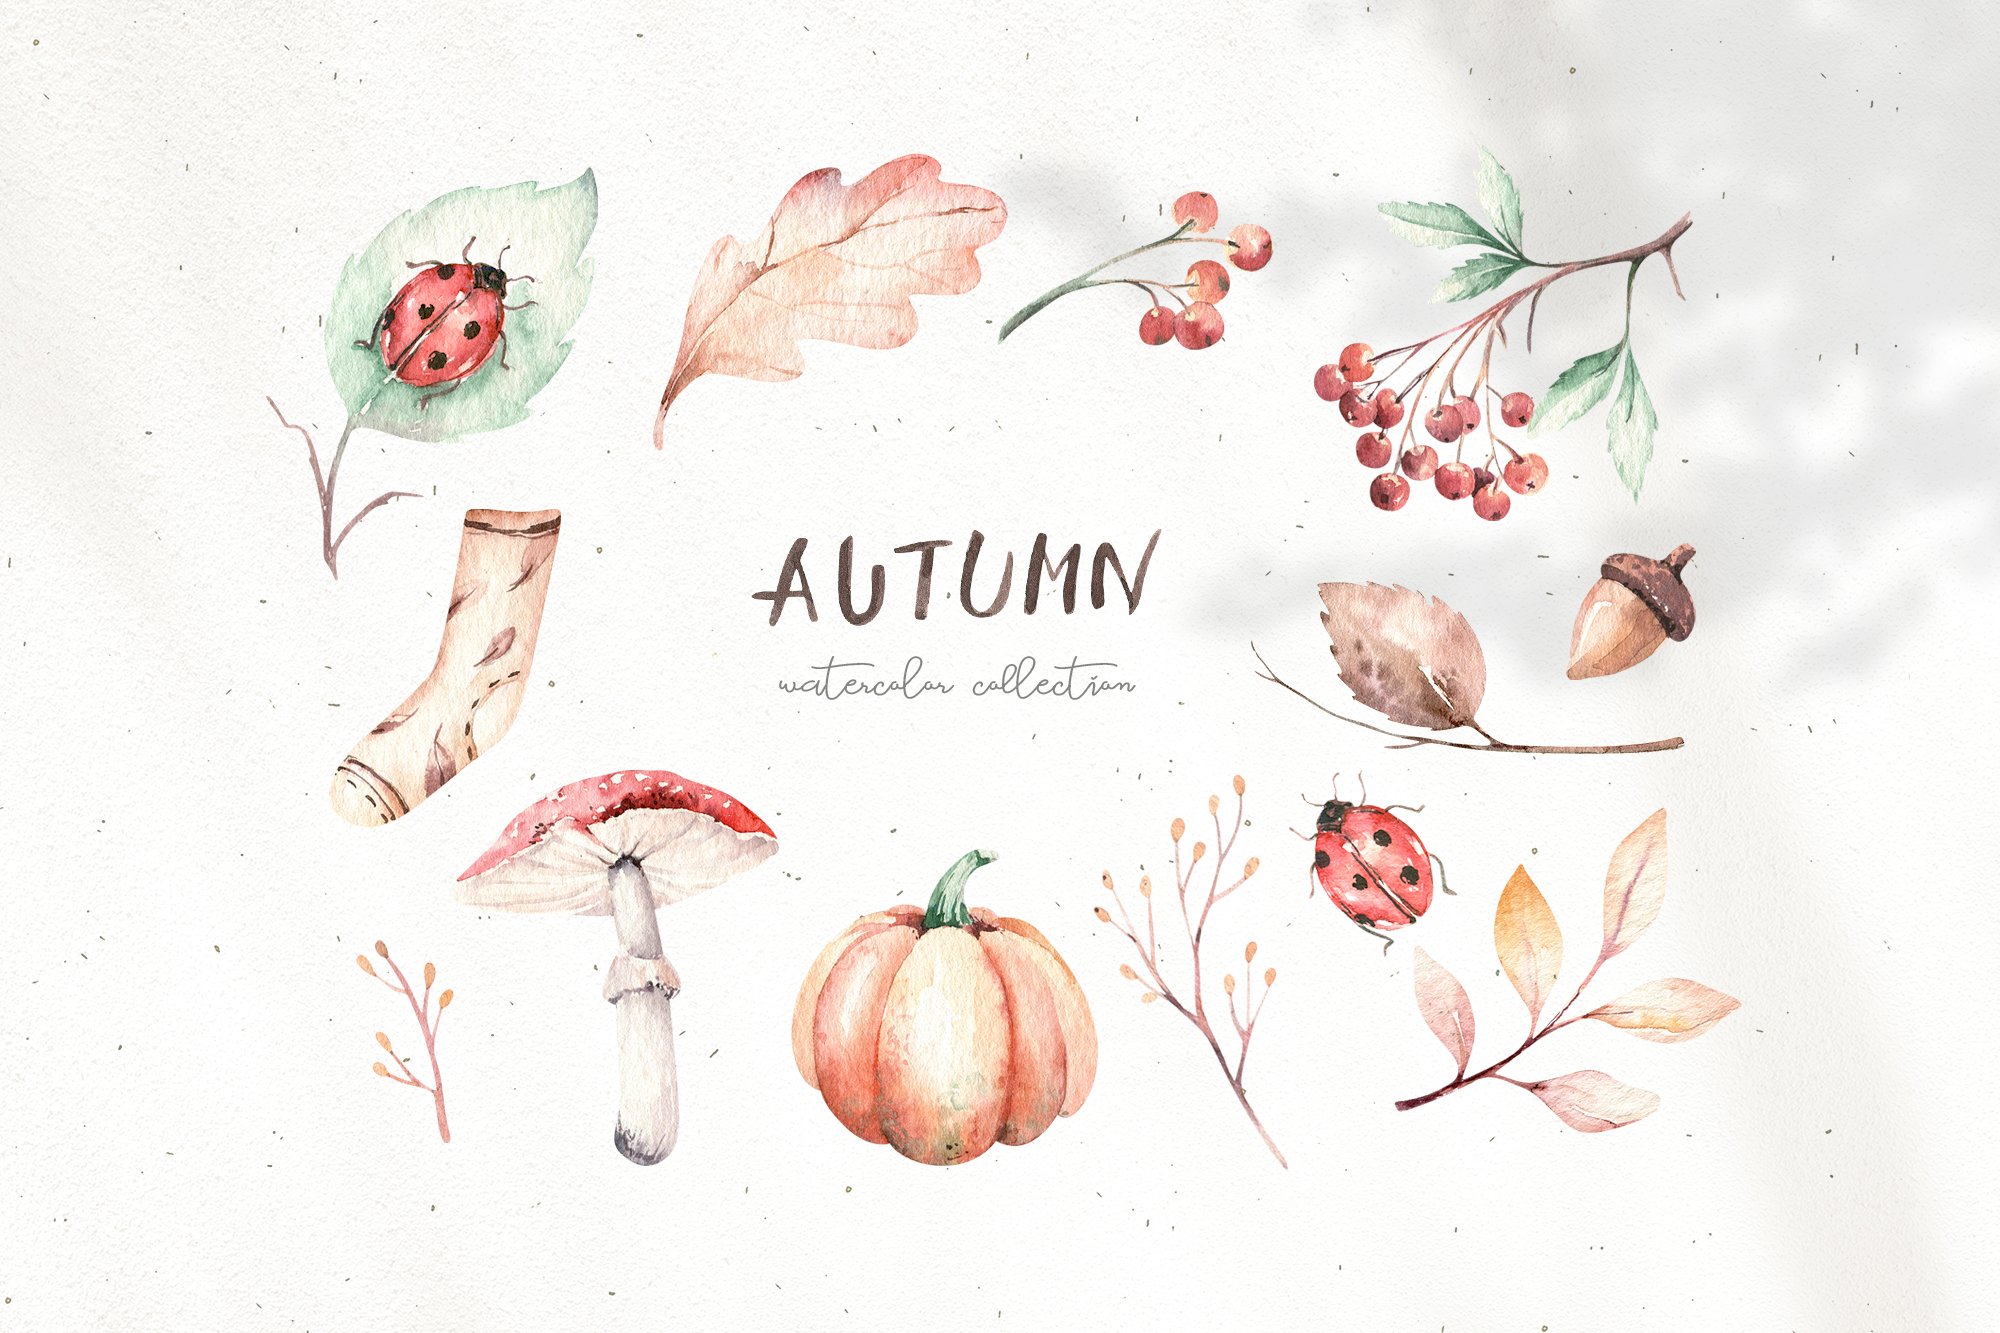 Autumn Time Watercolor Collection